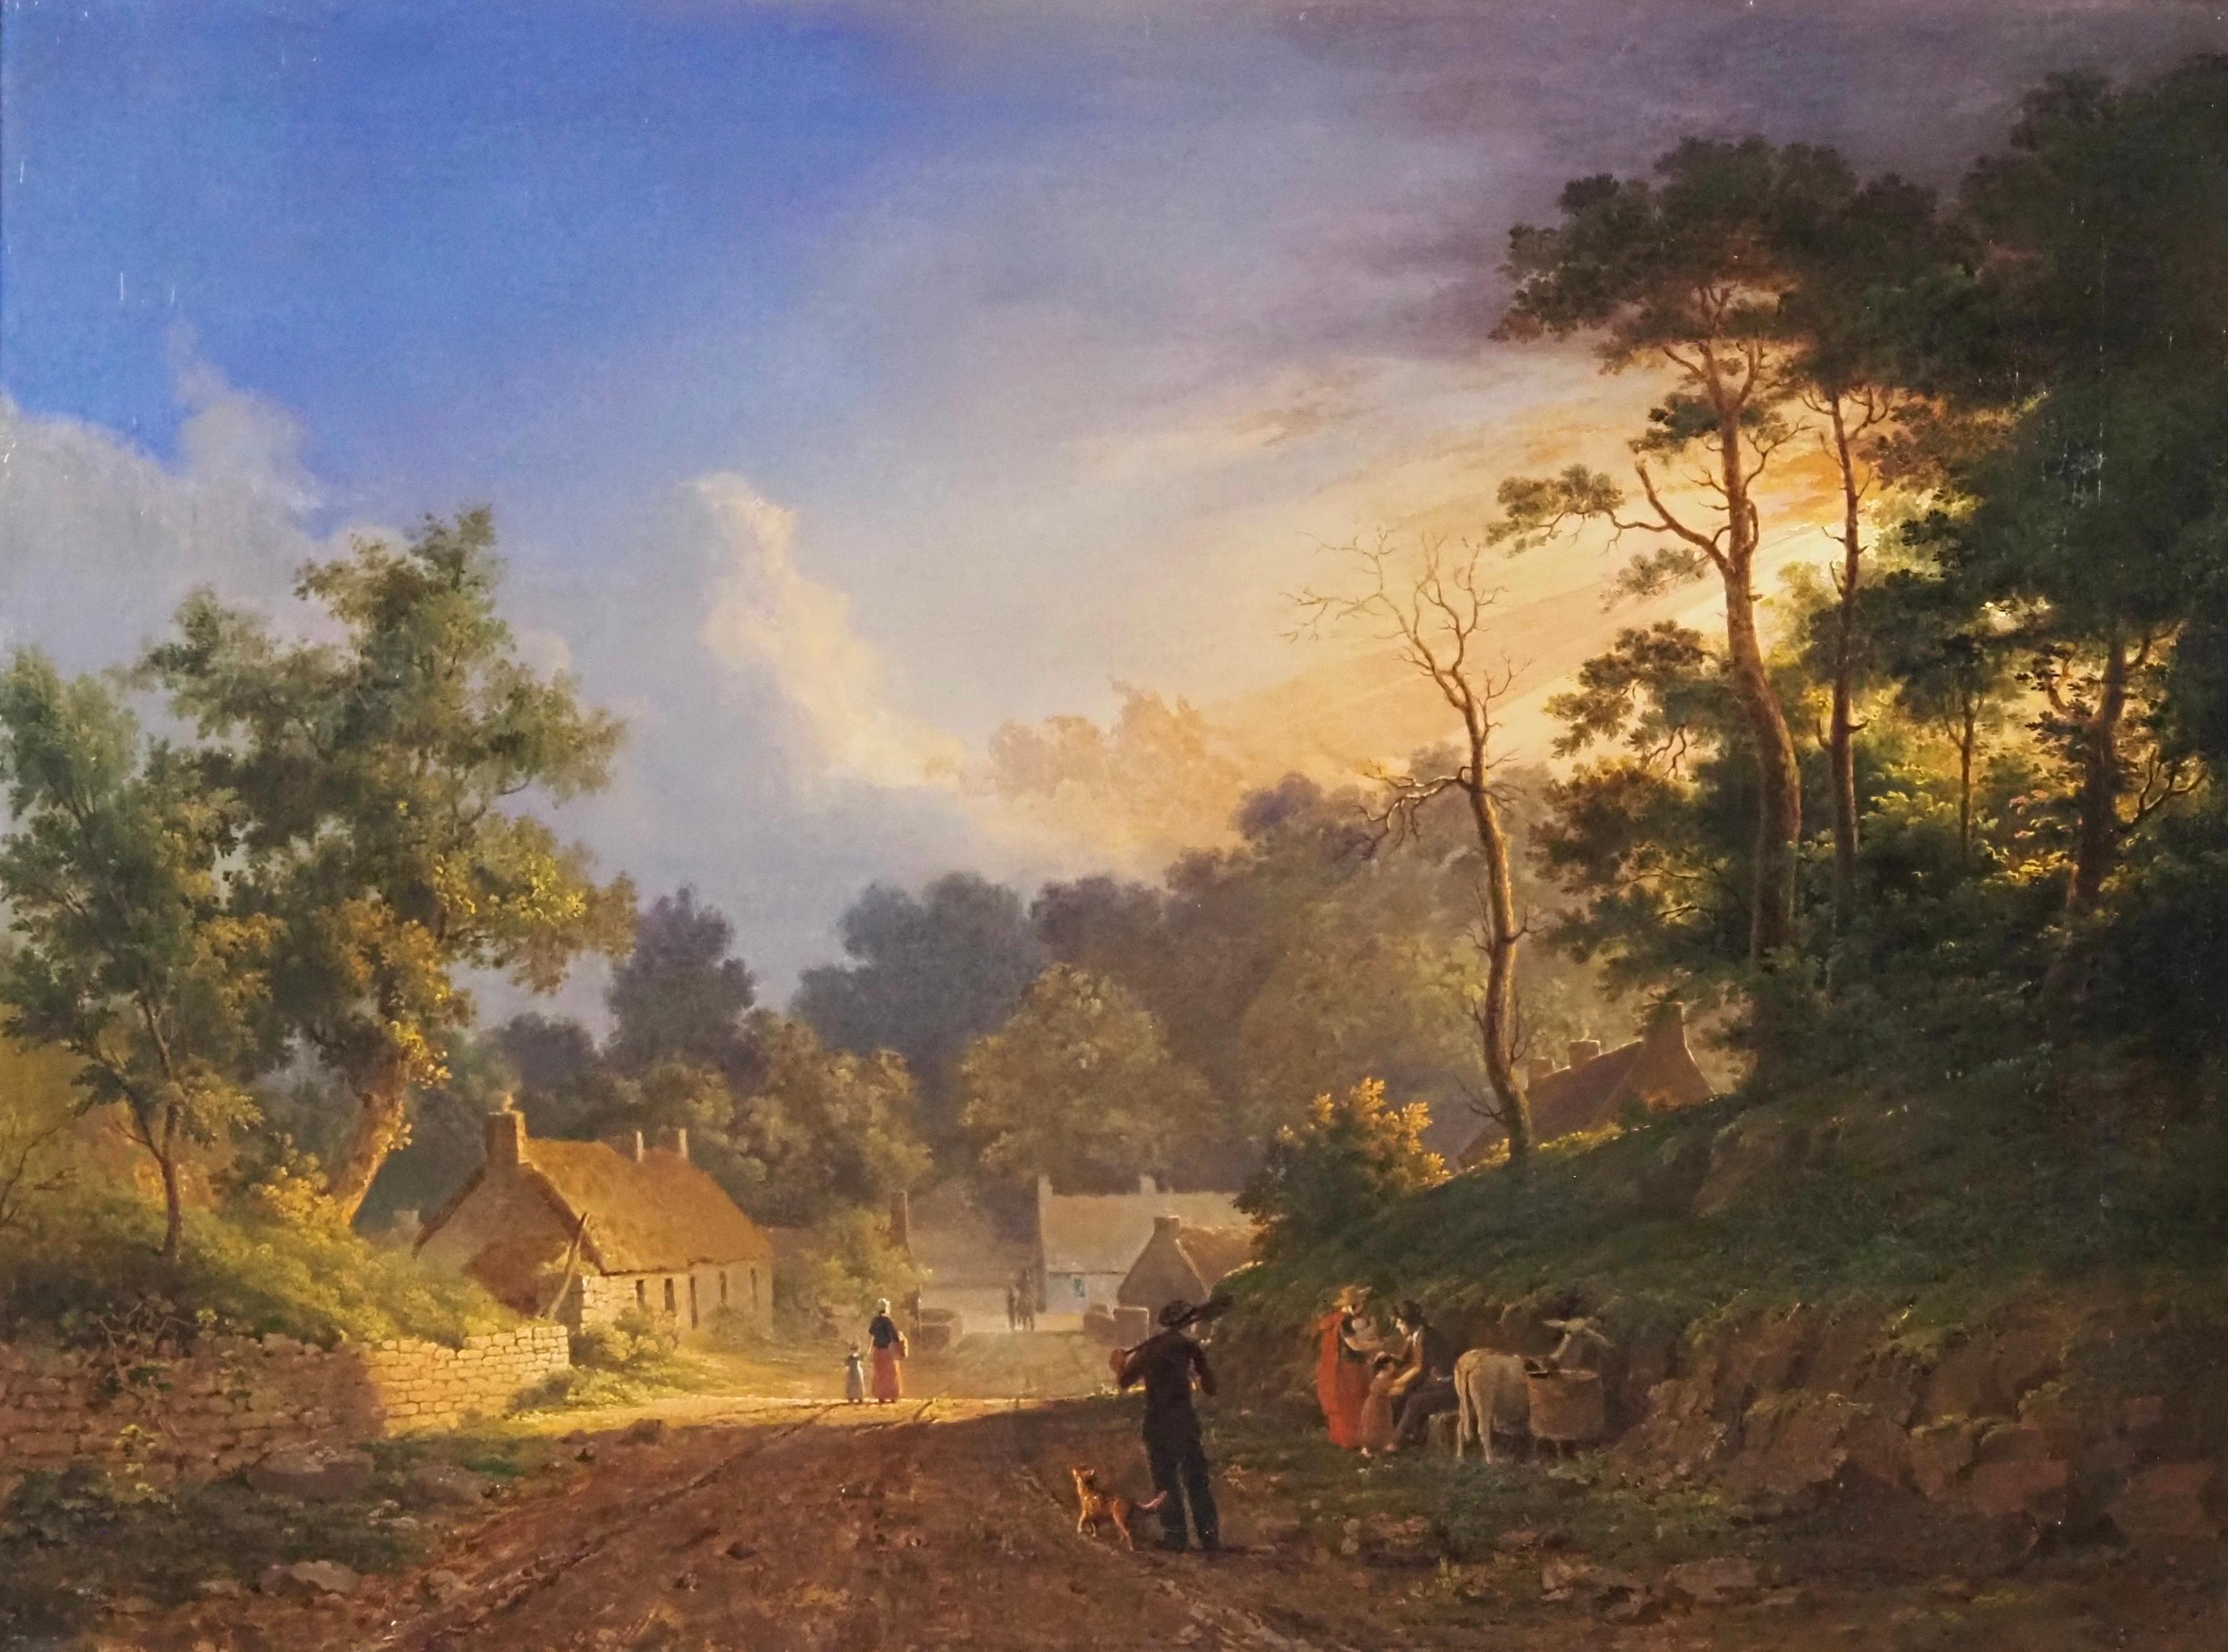 Sunset over a rural landscape - Painting by Abraham Pether